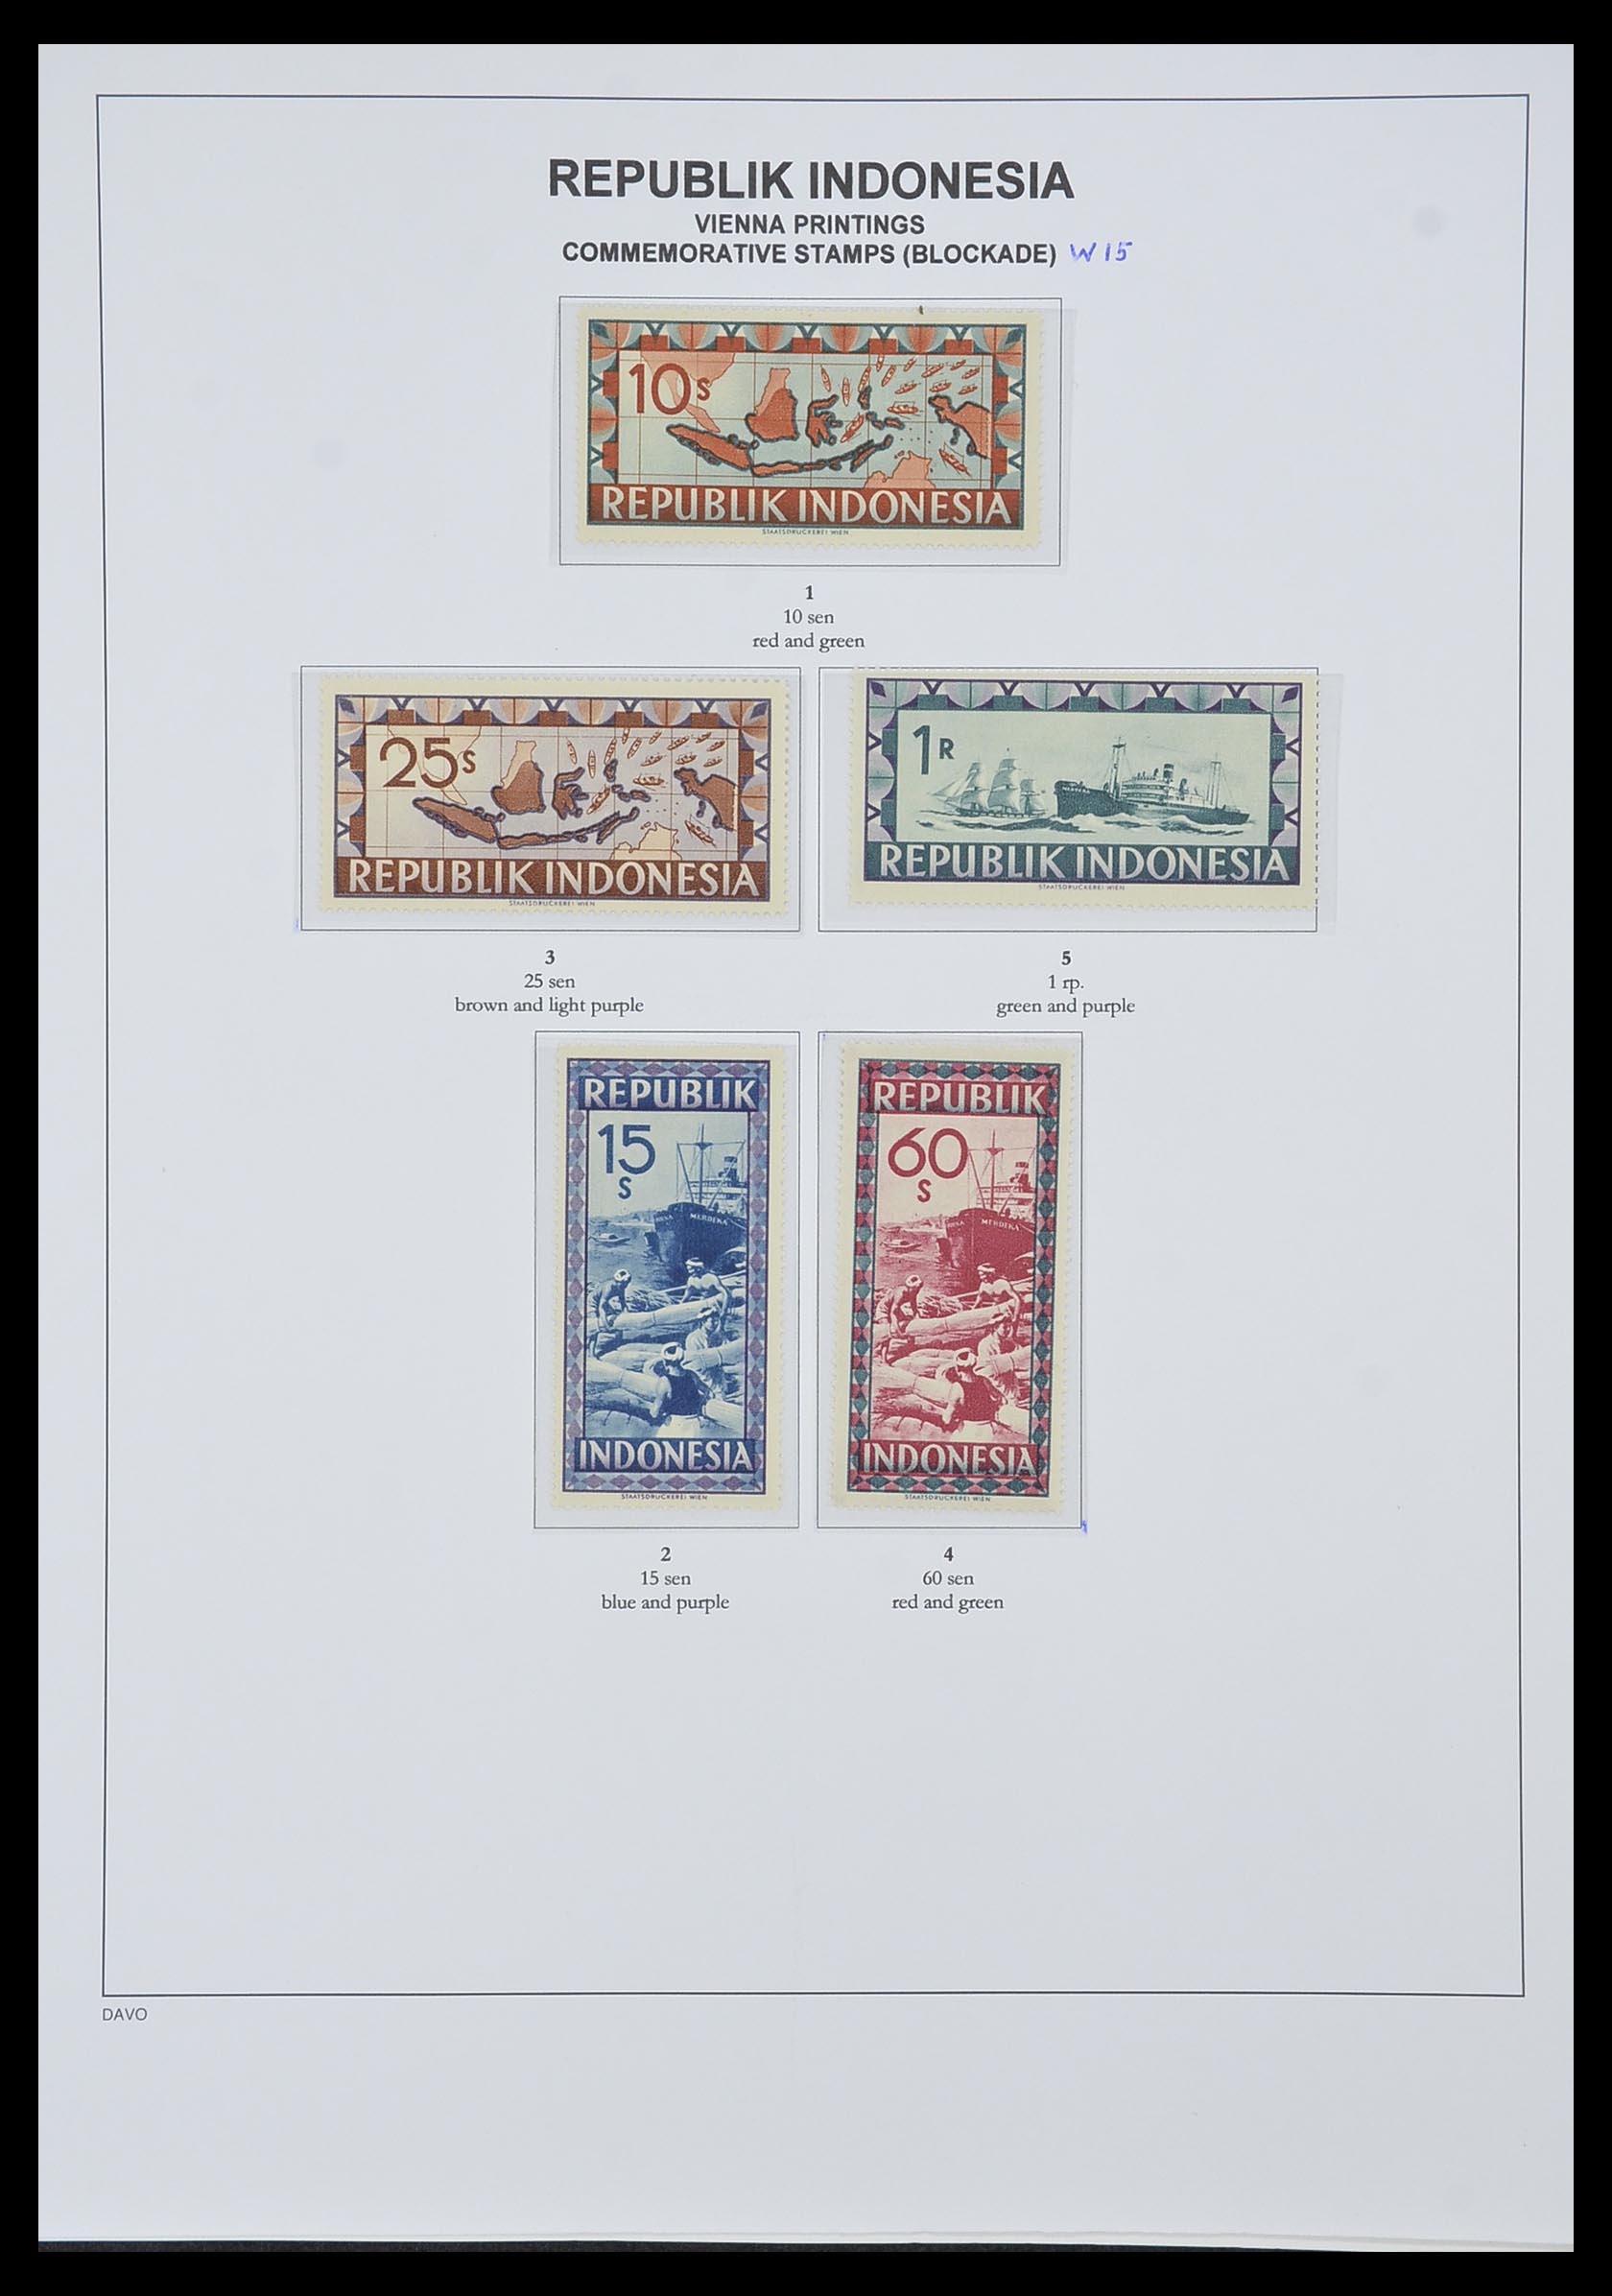 33988 025 - Stamp collection 33988 Vienna printings Indonesia.